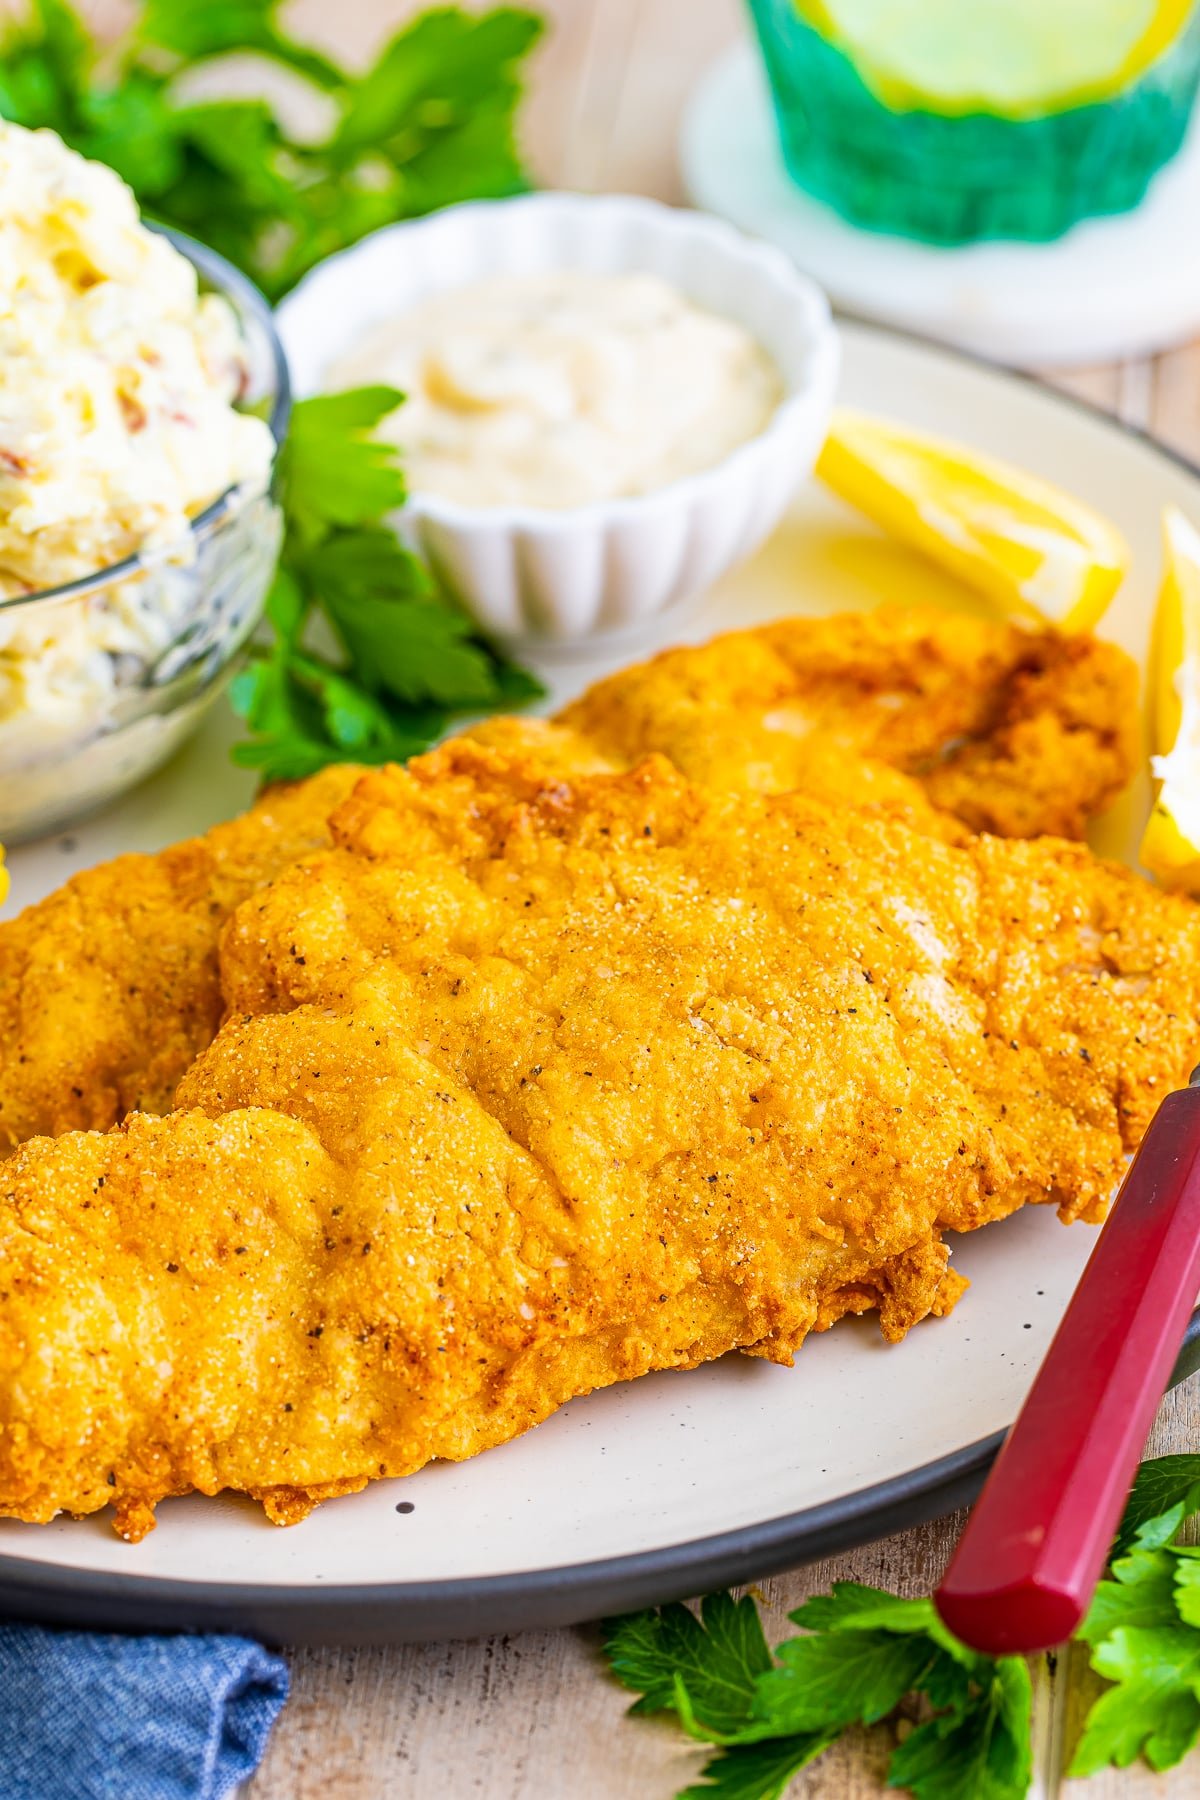 fried catfish recipe on a tan plate